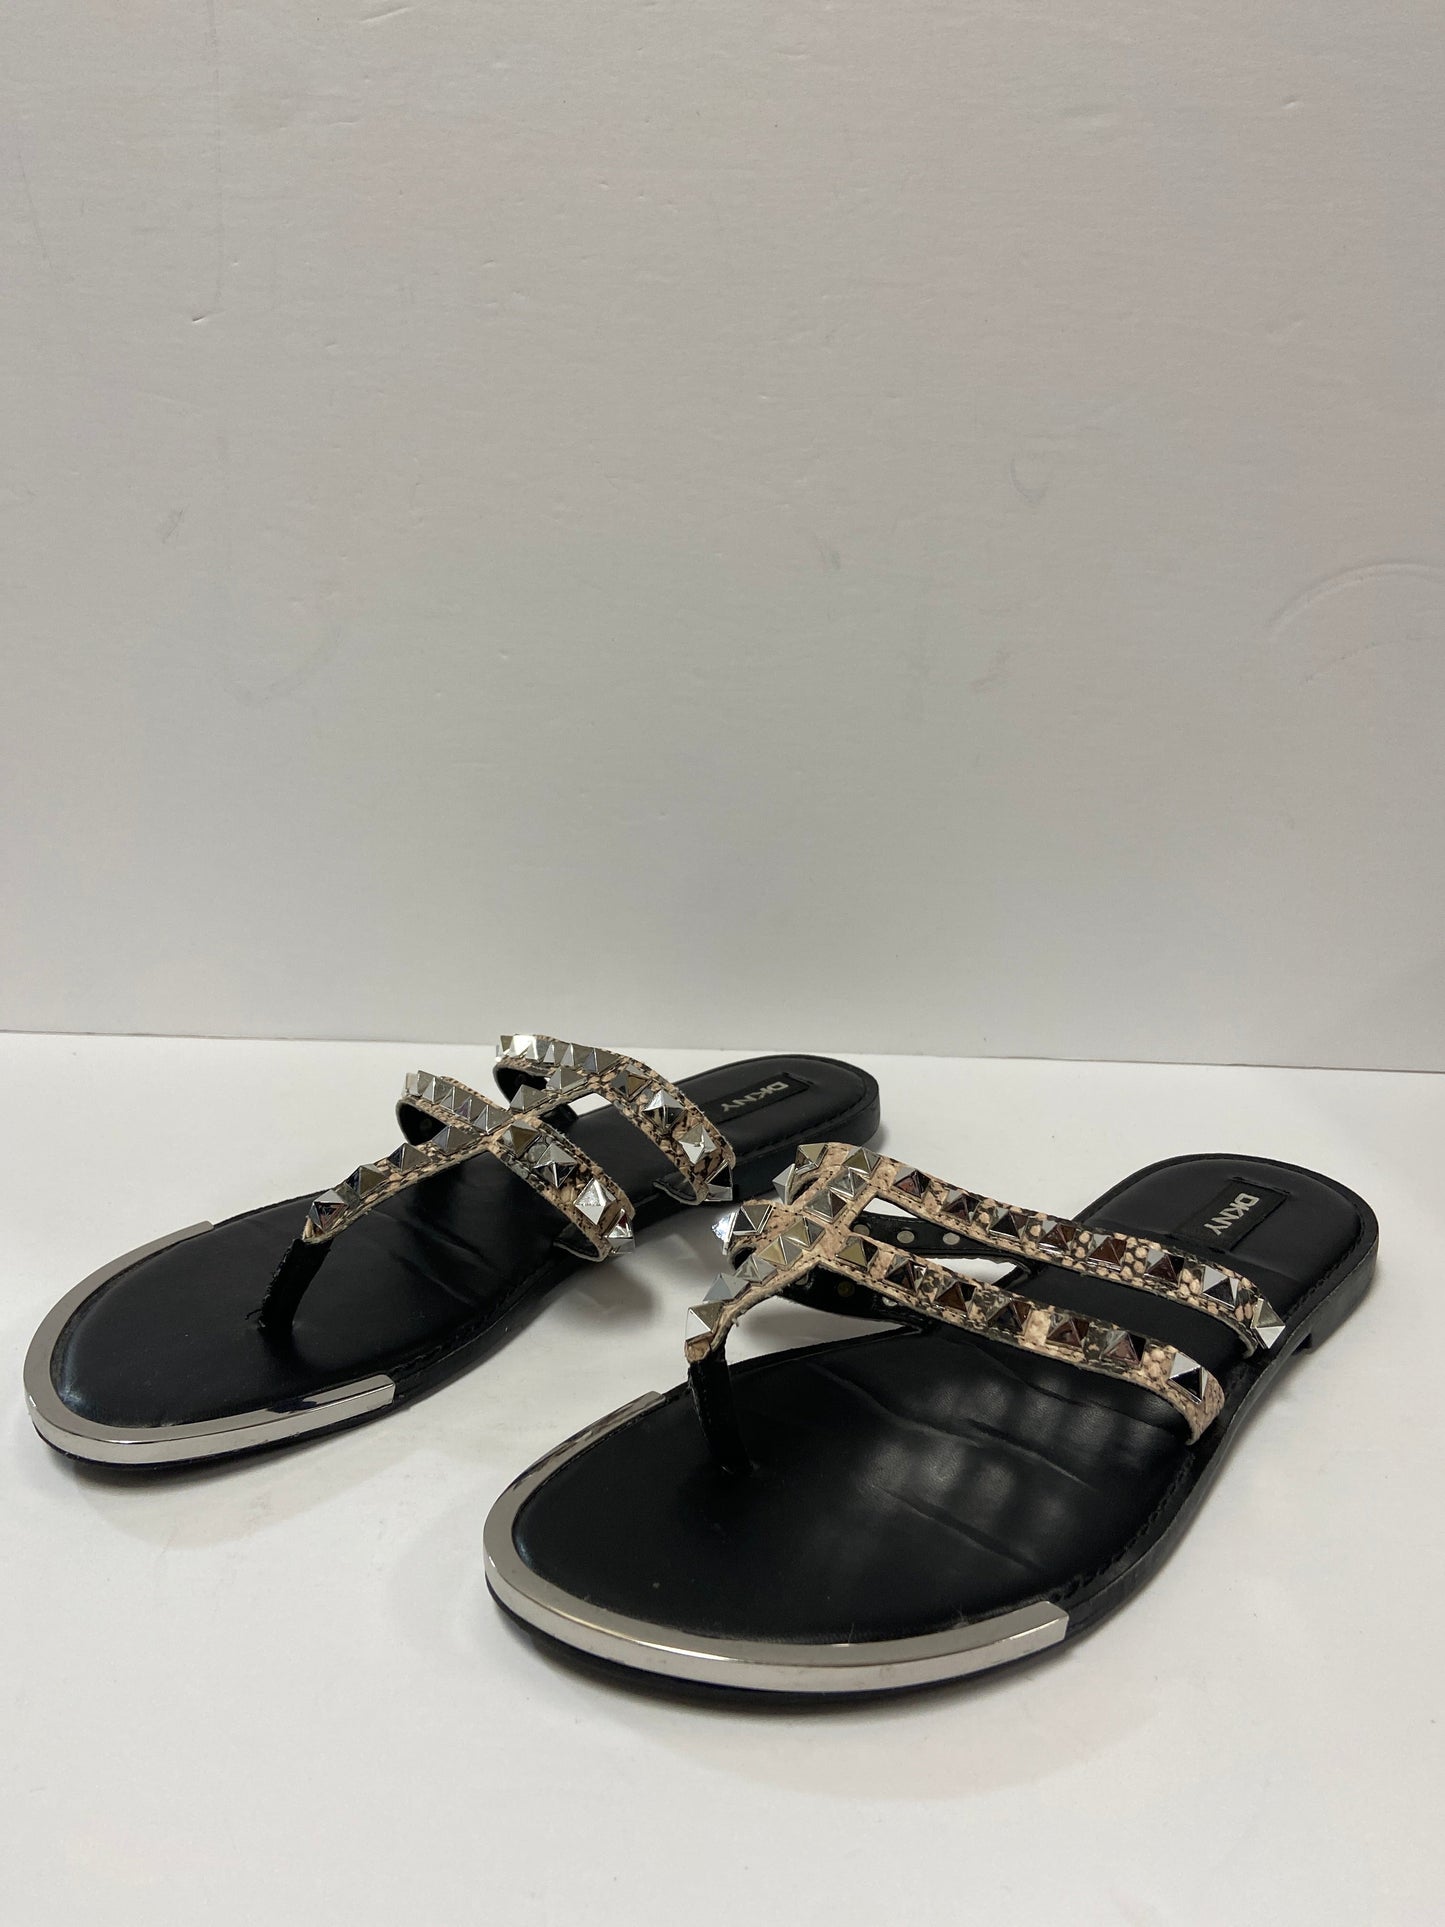 Sandals Flats By Dkny  Size: 9